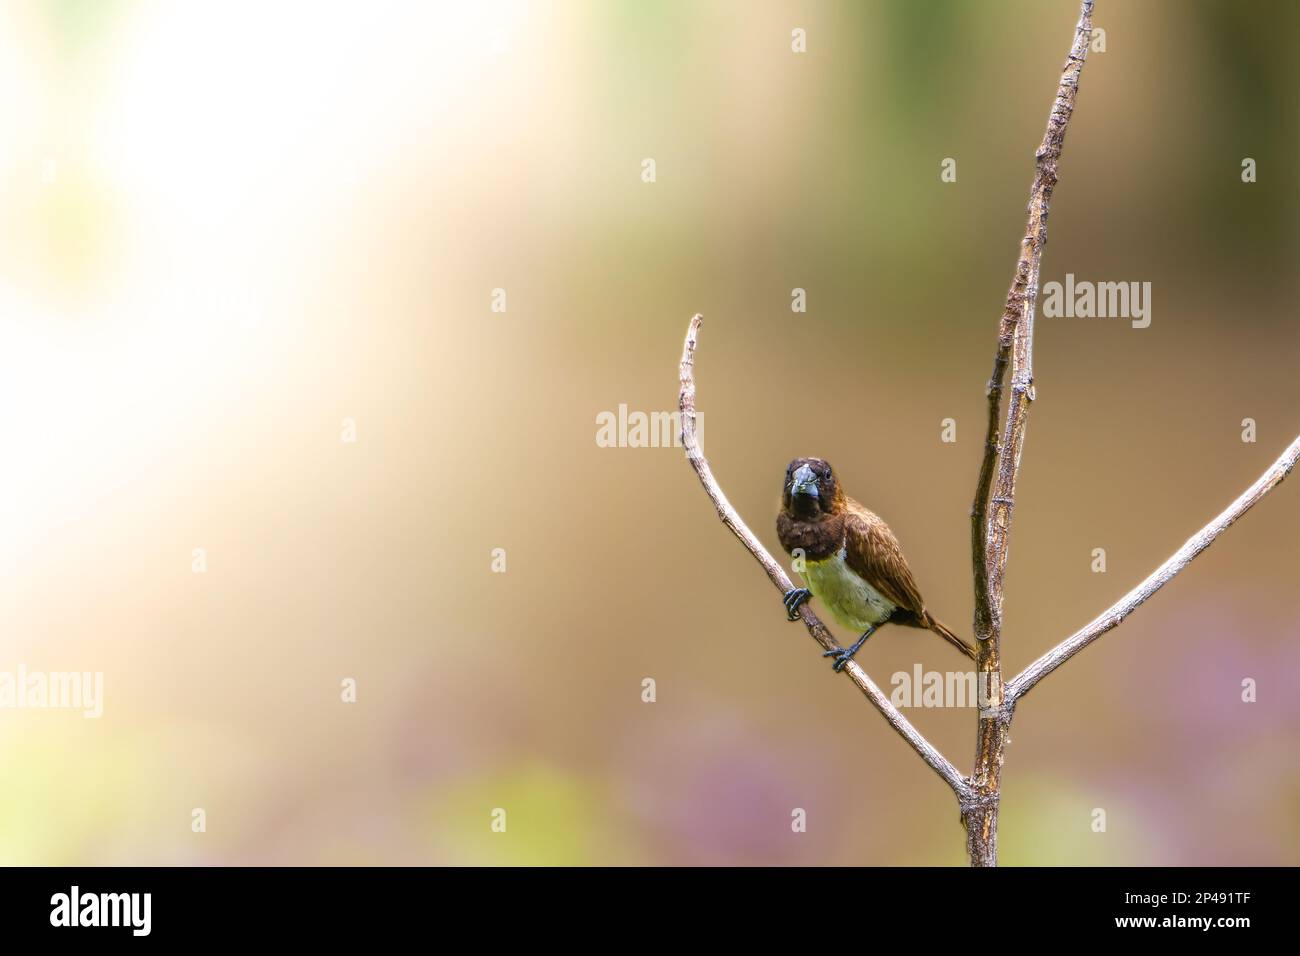 A bird of the type Estrildidae sparrow or estrildid finches perched on a branch on a sunny morning, background in the form of blurred green leaves in Stock Photo